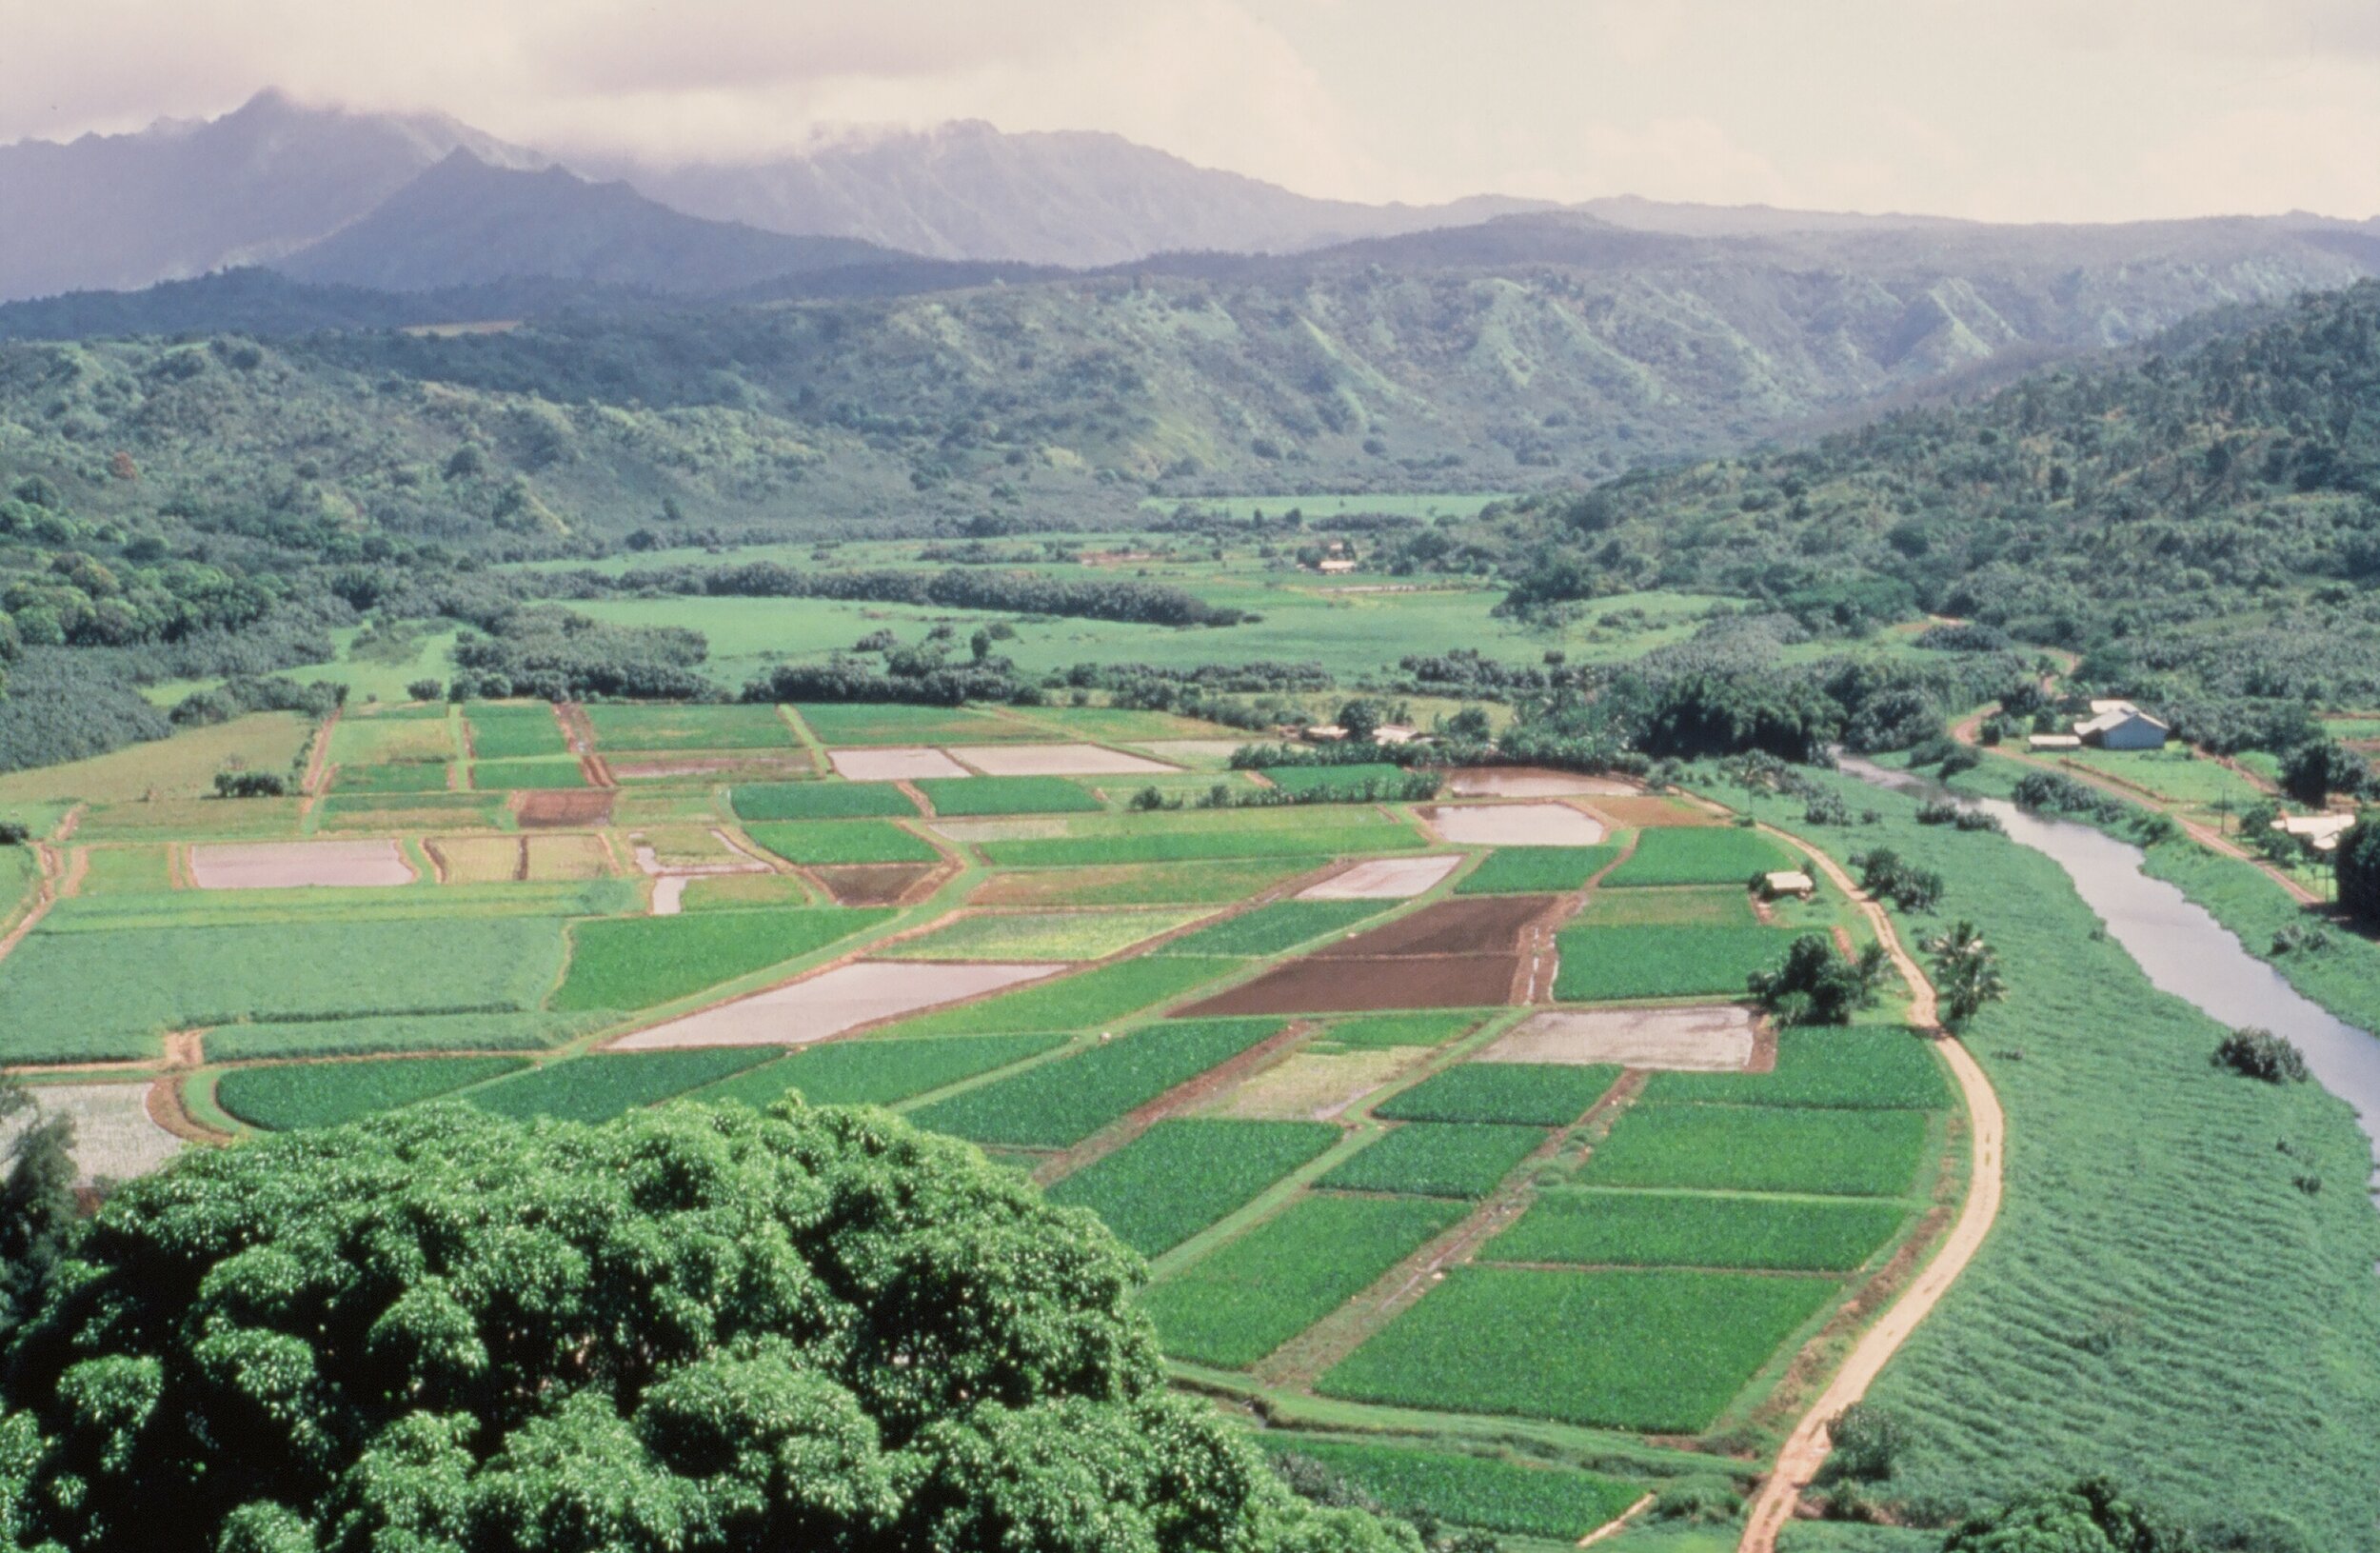 Live Public Hearing Webinars: Draft Wetlands Management and Waterbird Conservation Plan and Environmental Assessment for the Hanalei National Wildlife Refuge, HI